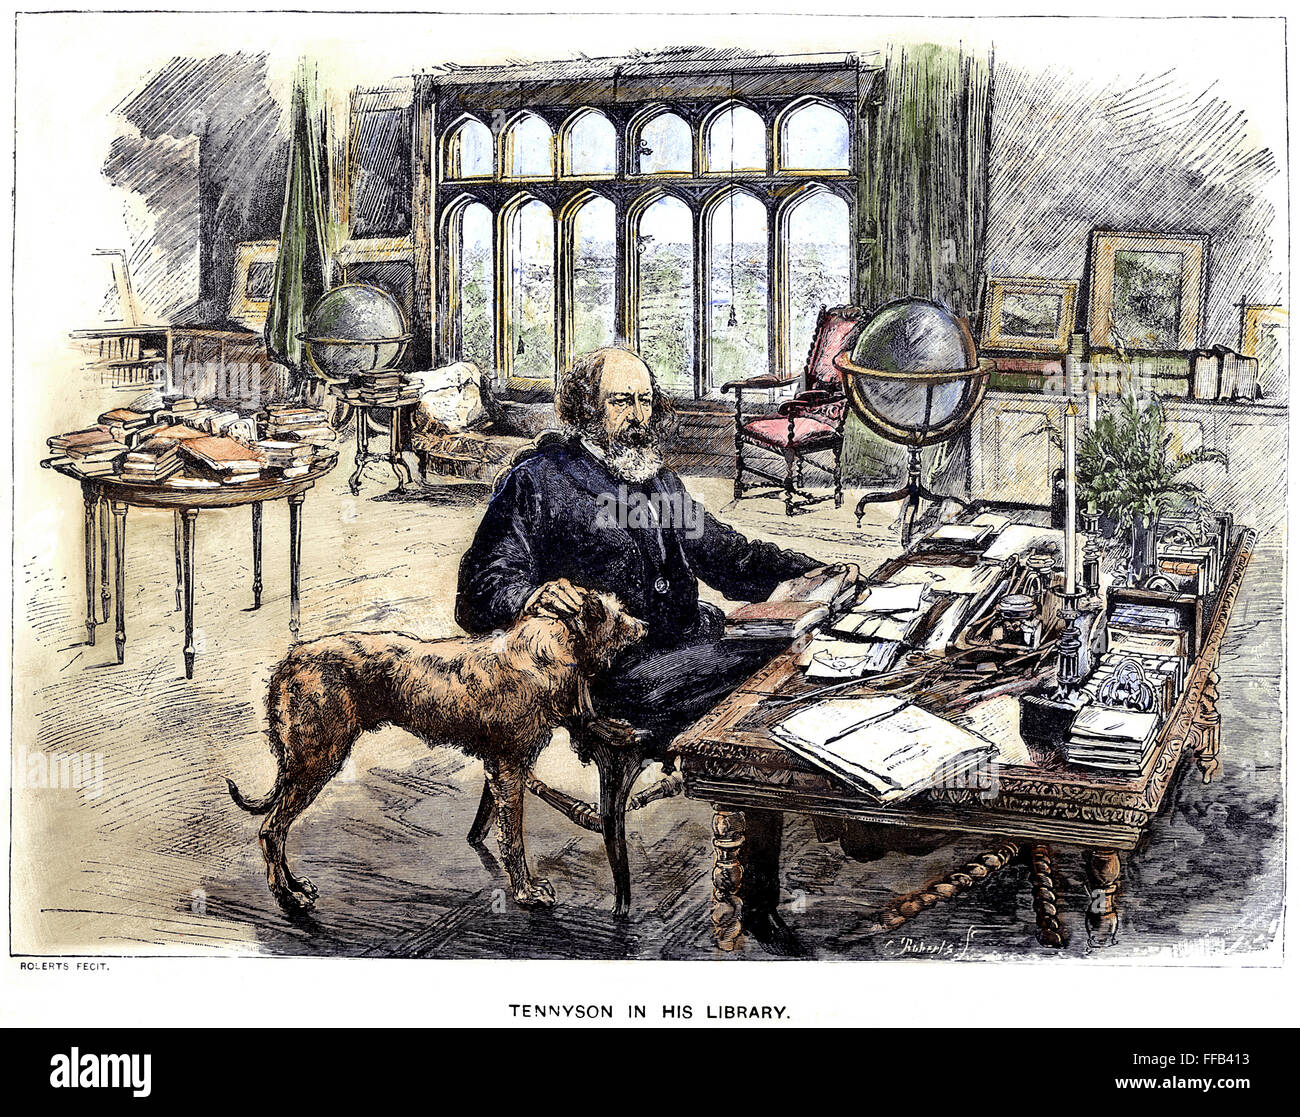 LORD ALFRED TENNYSON /n(1809-1892). 1st Baron Tennyson. English poet. Tennyson in his library with his dog. Colored engraving, 19th century. Stock Photo